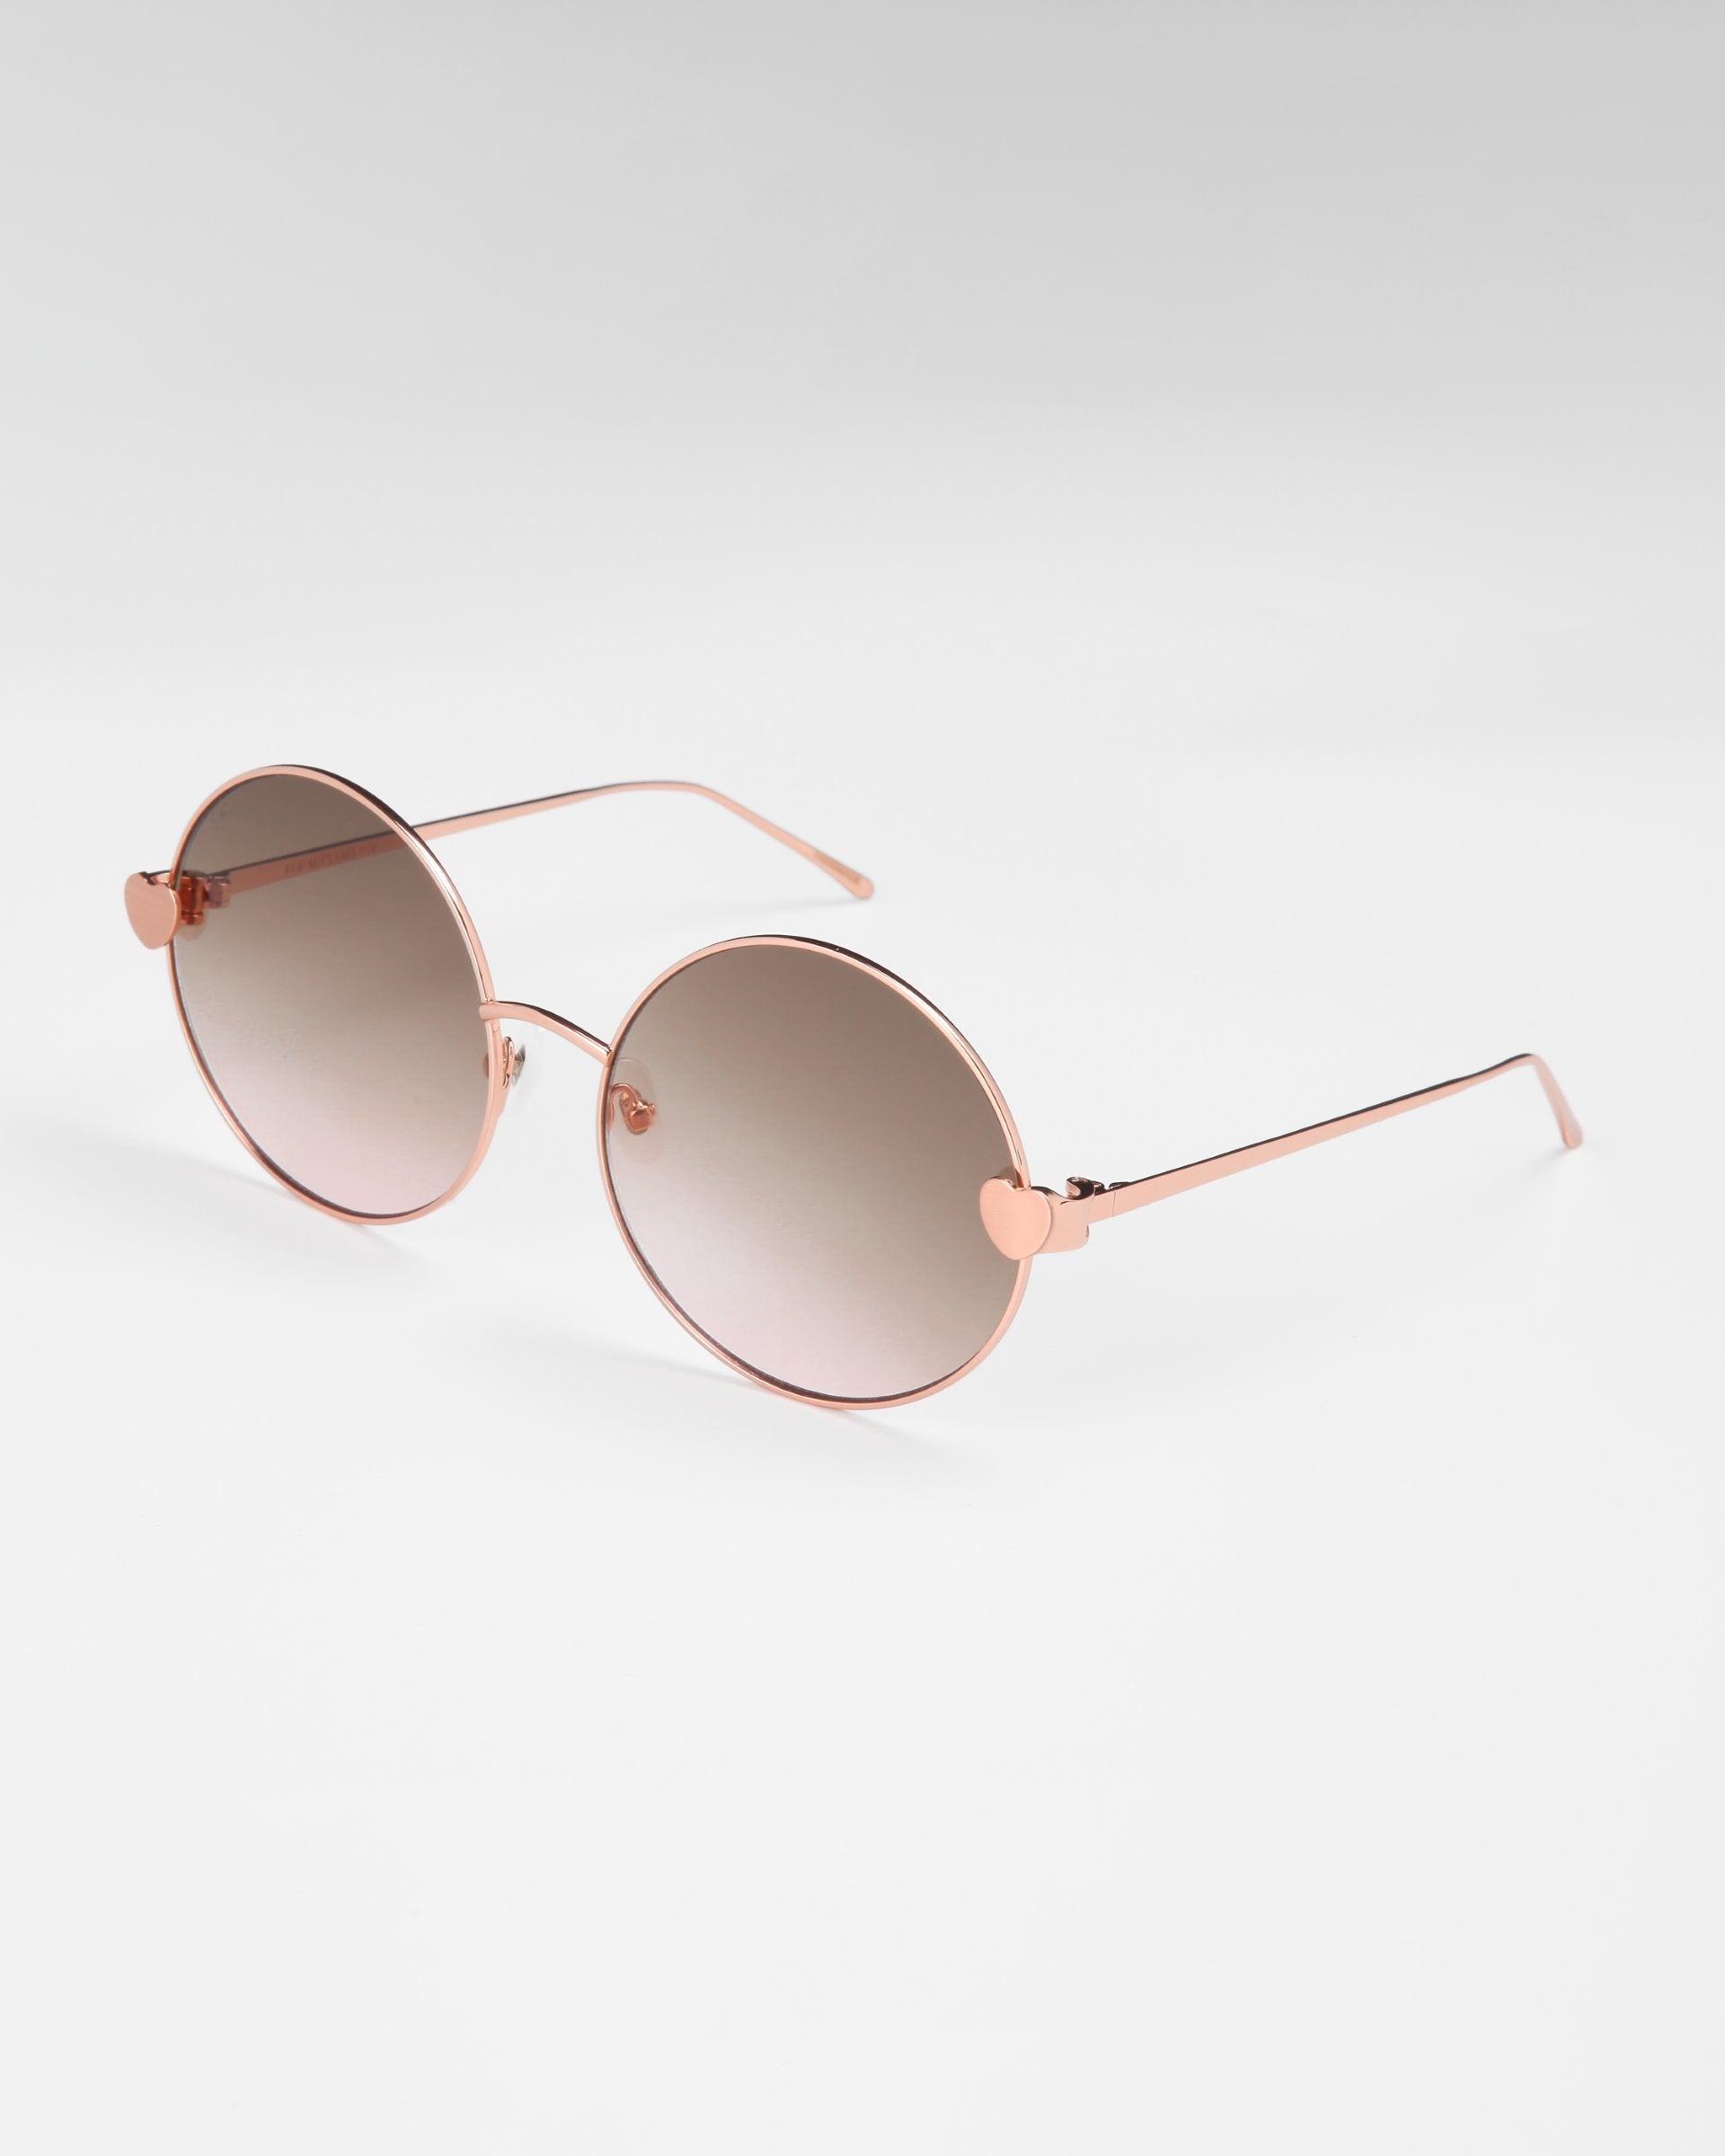 A pair of stylish For Art&#39;s Sake® Love Story shades with round sunglasses, featuring a rose gold frame and brown gradient lenses. The temples are sleek with thin arms, and there are heart-shaped accents where the lenses meet the frame. Equipped with jadestone nose pads for comfort and 100% UV protection. The background is plain white.